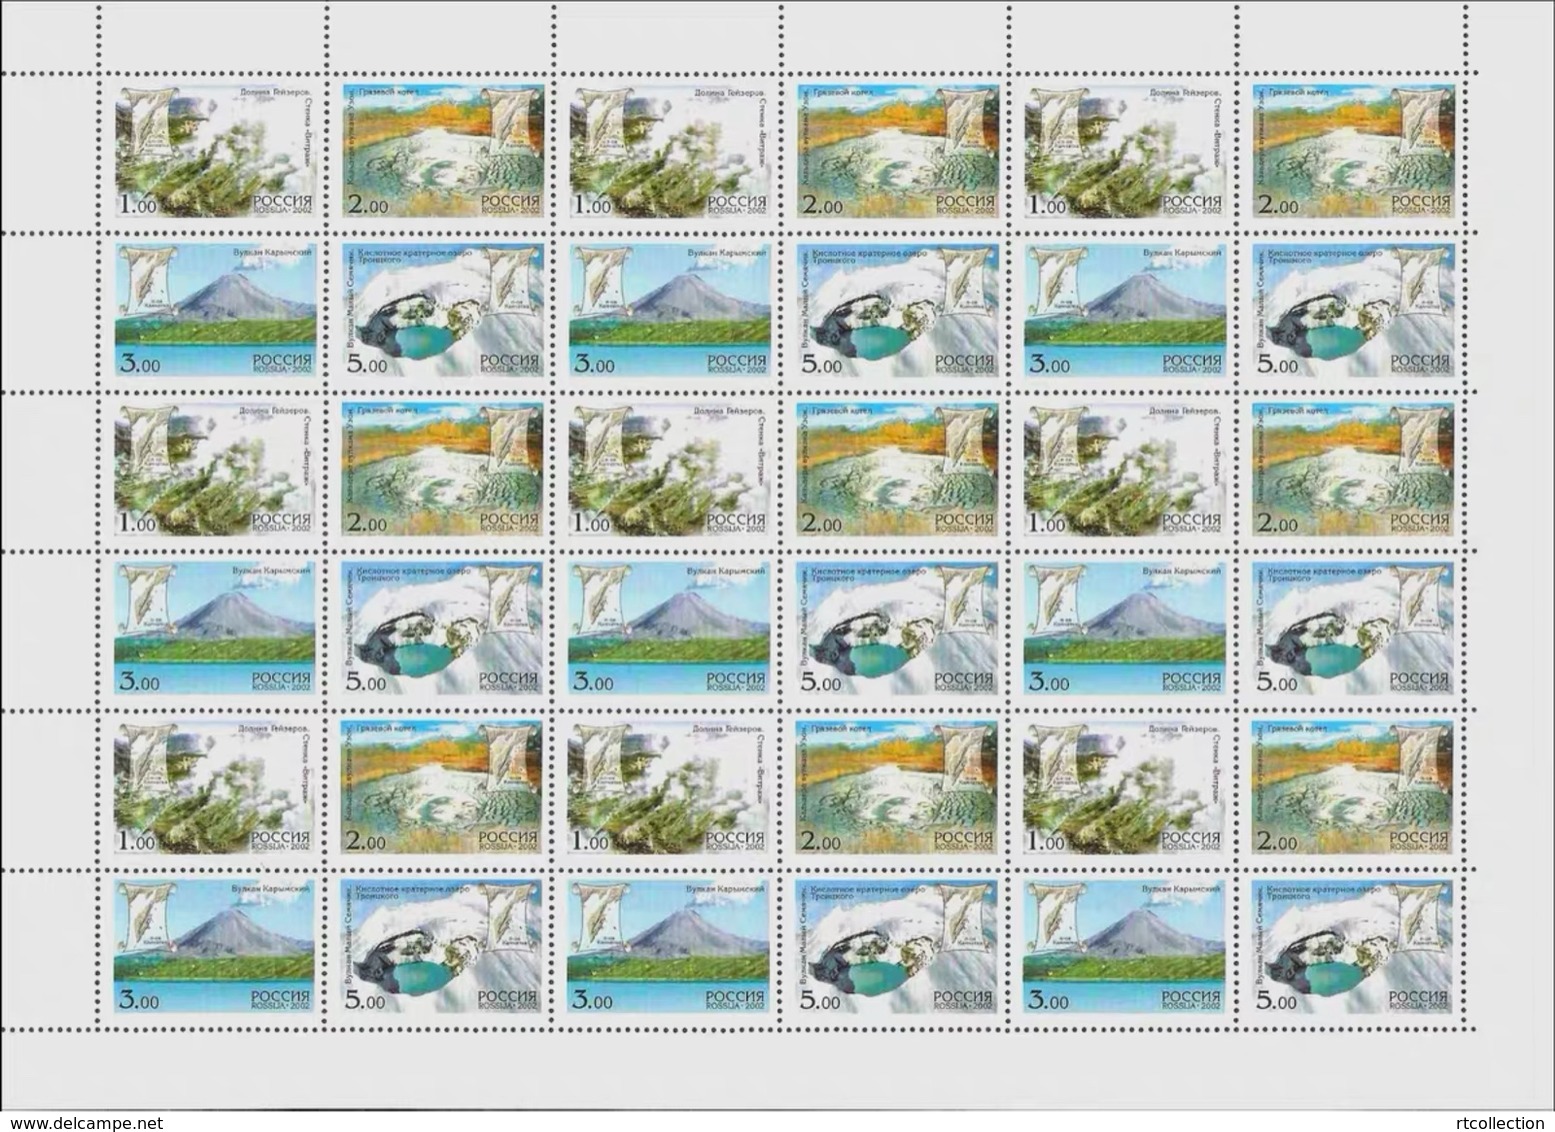 Russia 2002 Sheet Volcanoes Of Kamchatka Mountains Lake Environment Nature Regions Places Stamps MNH Mi 990-993 - Feuilles Complètes